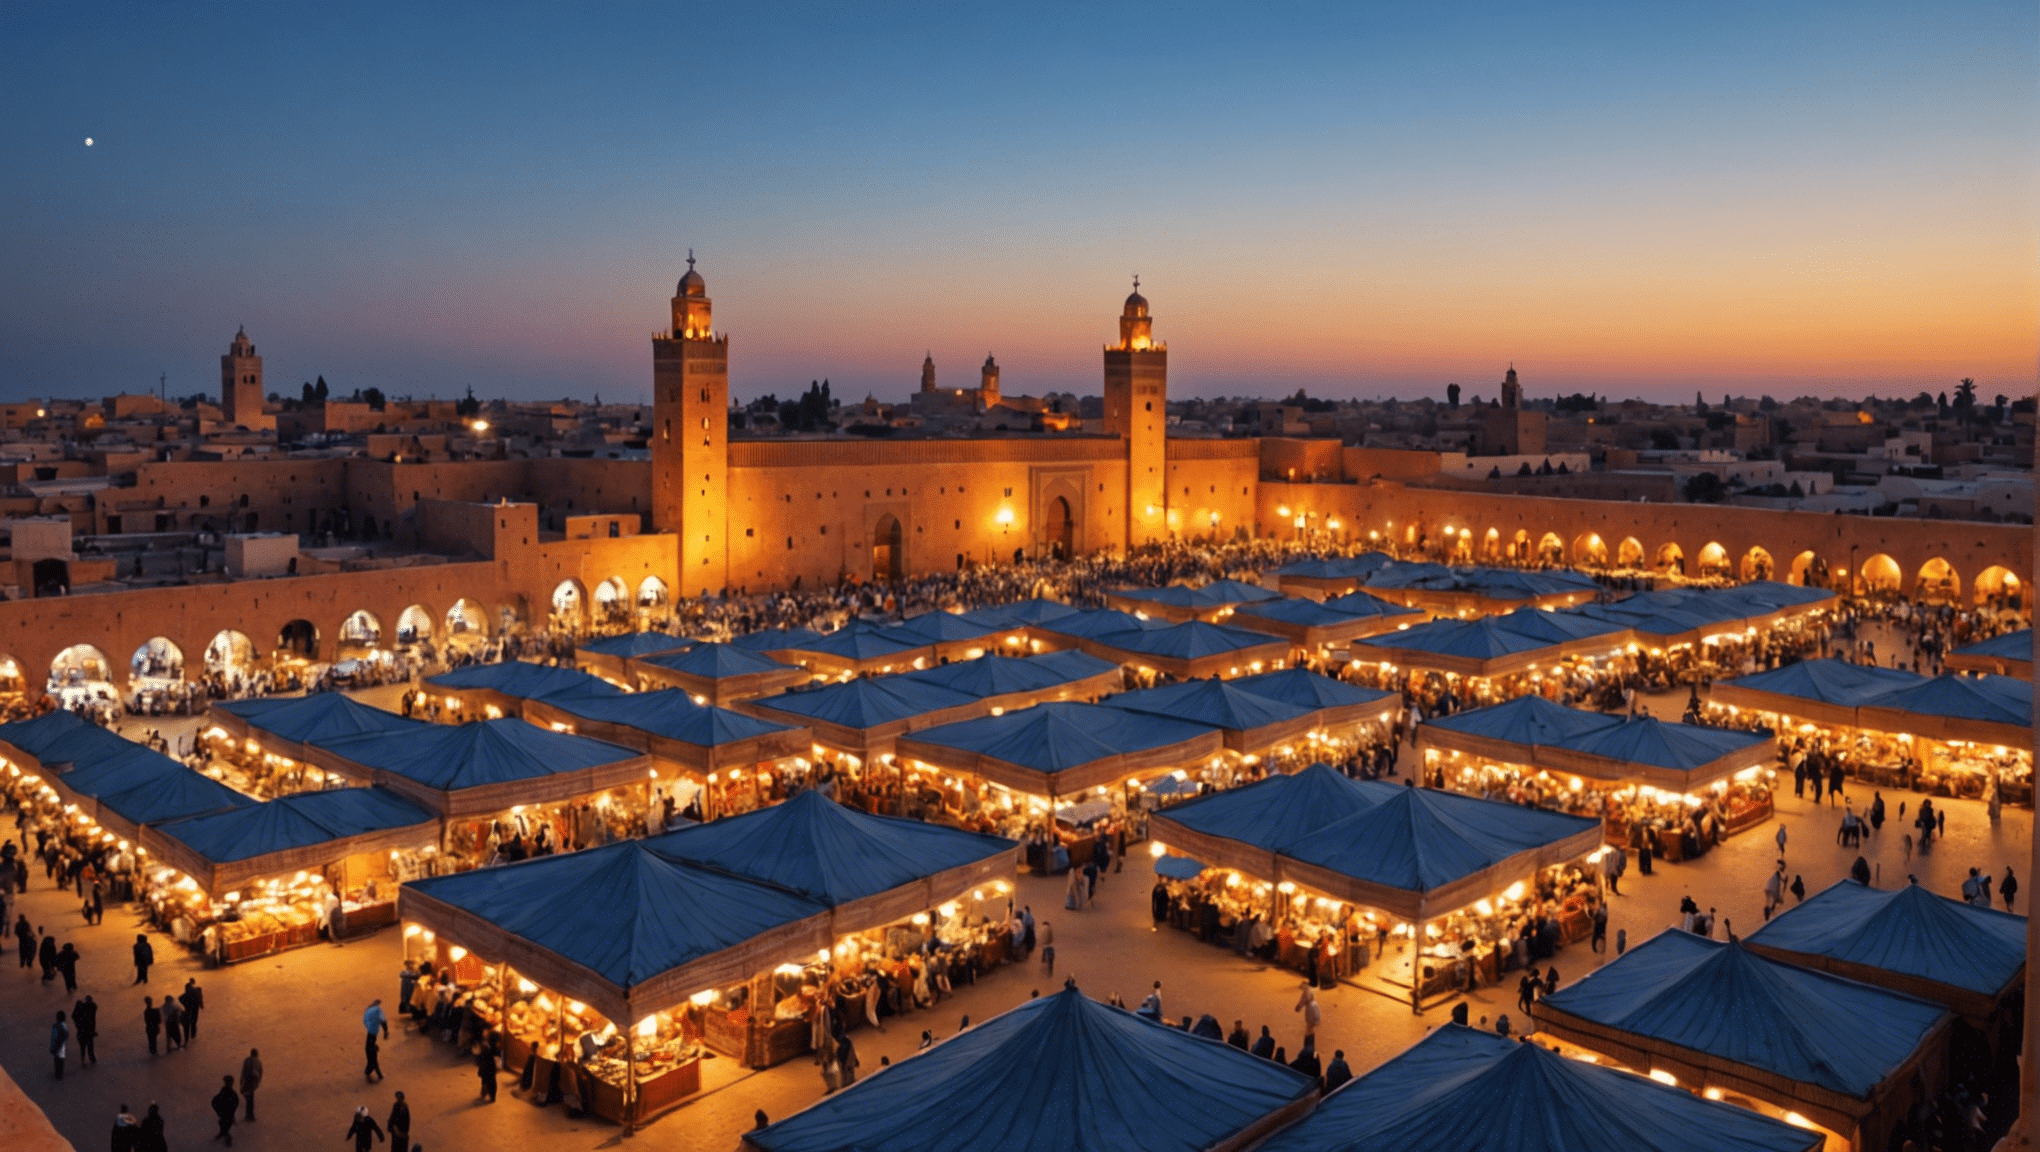 discover how ramadan is celebrated in marrakech and experience the traditions, customs, and delicious food during this holy month in morocco.